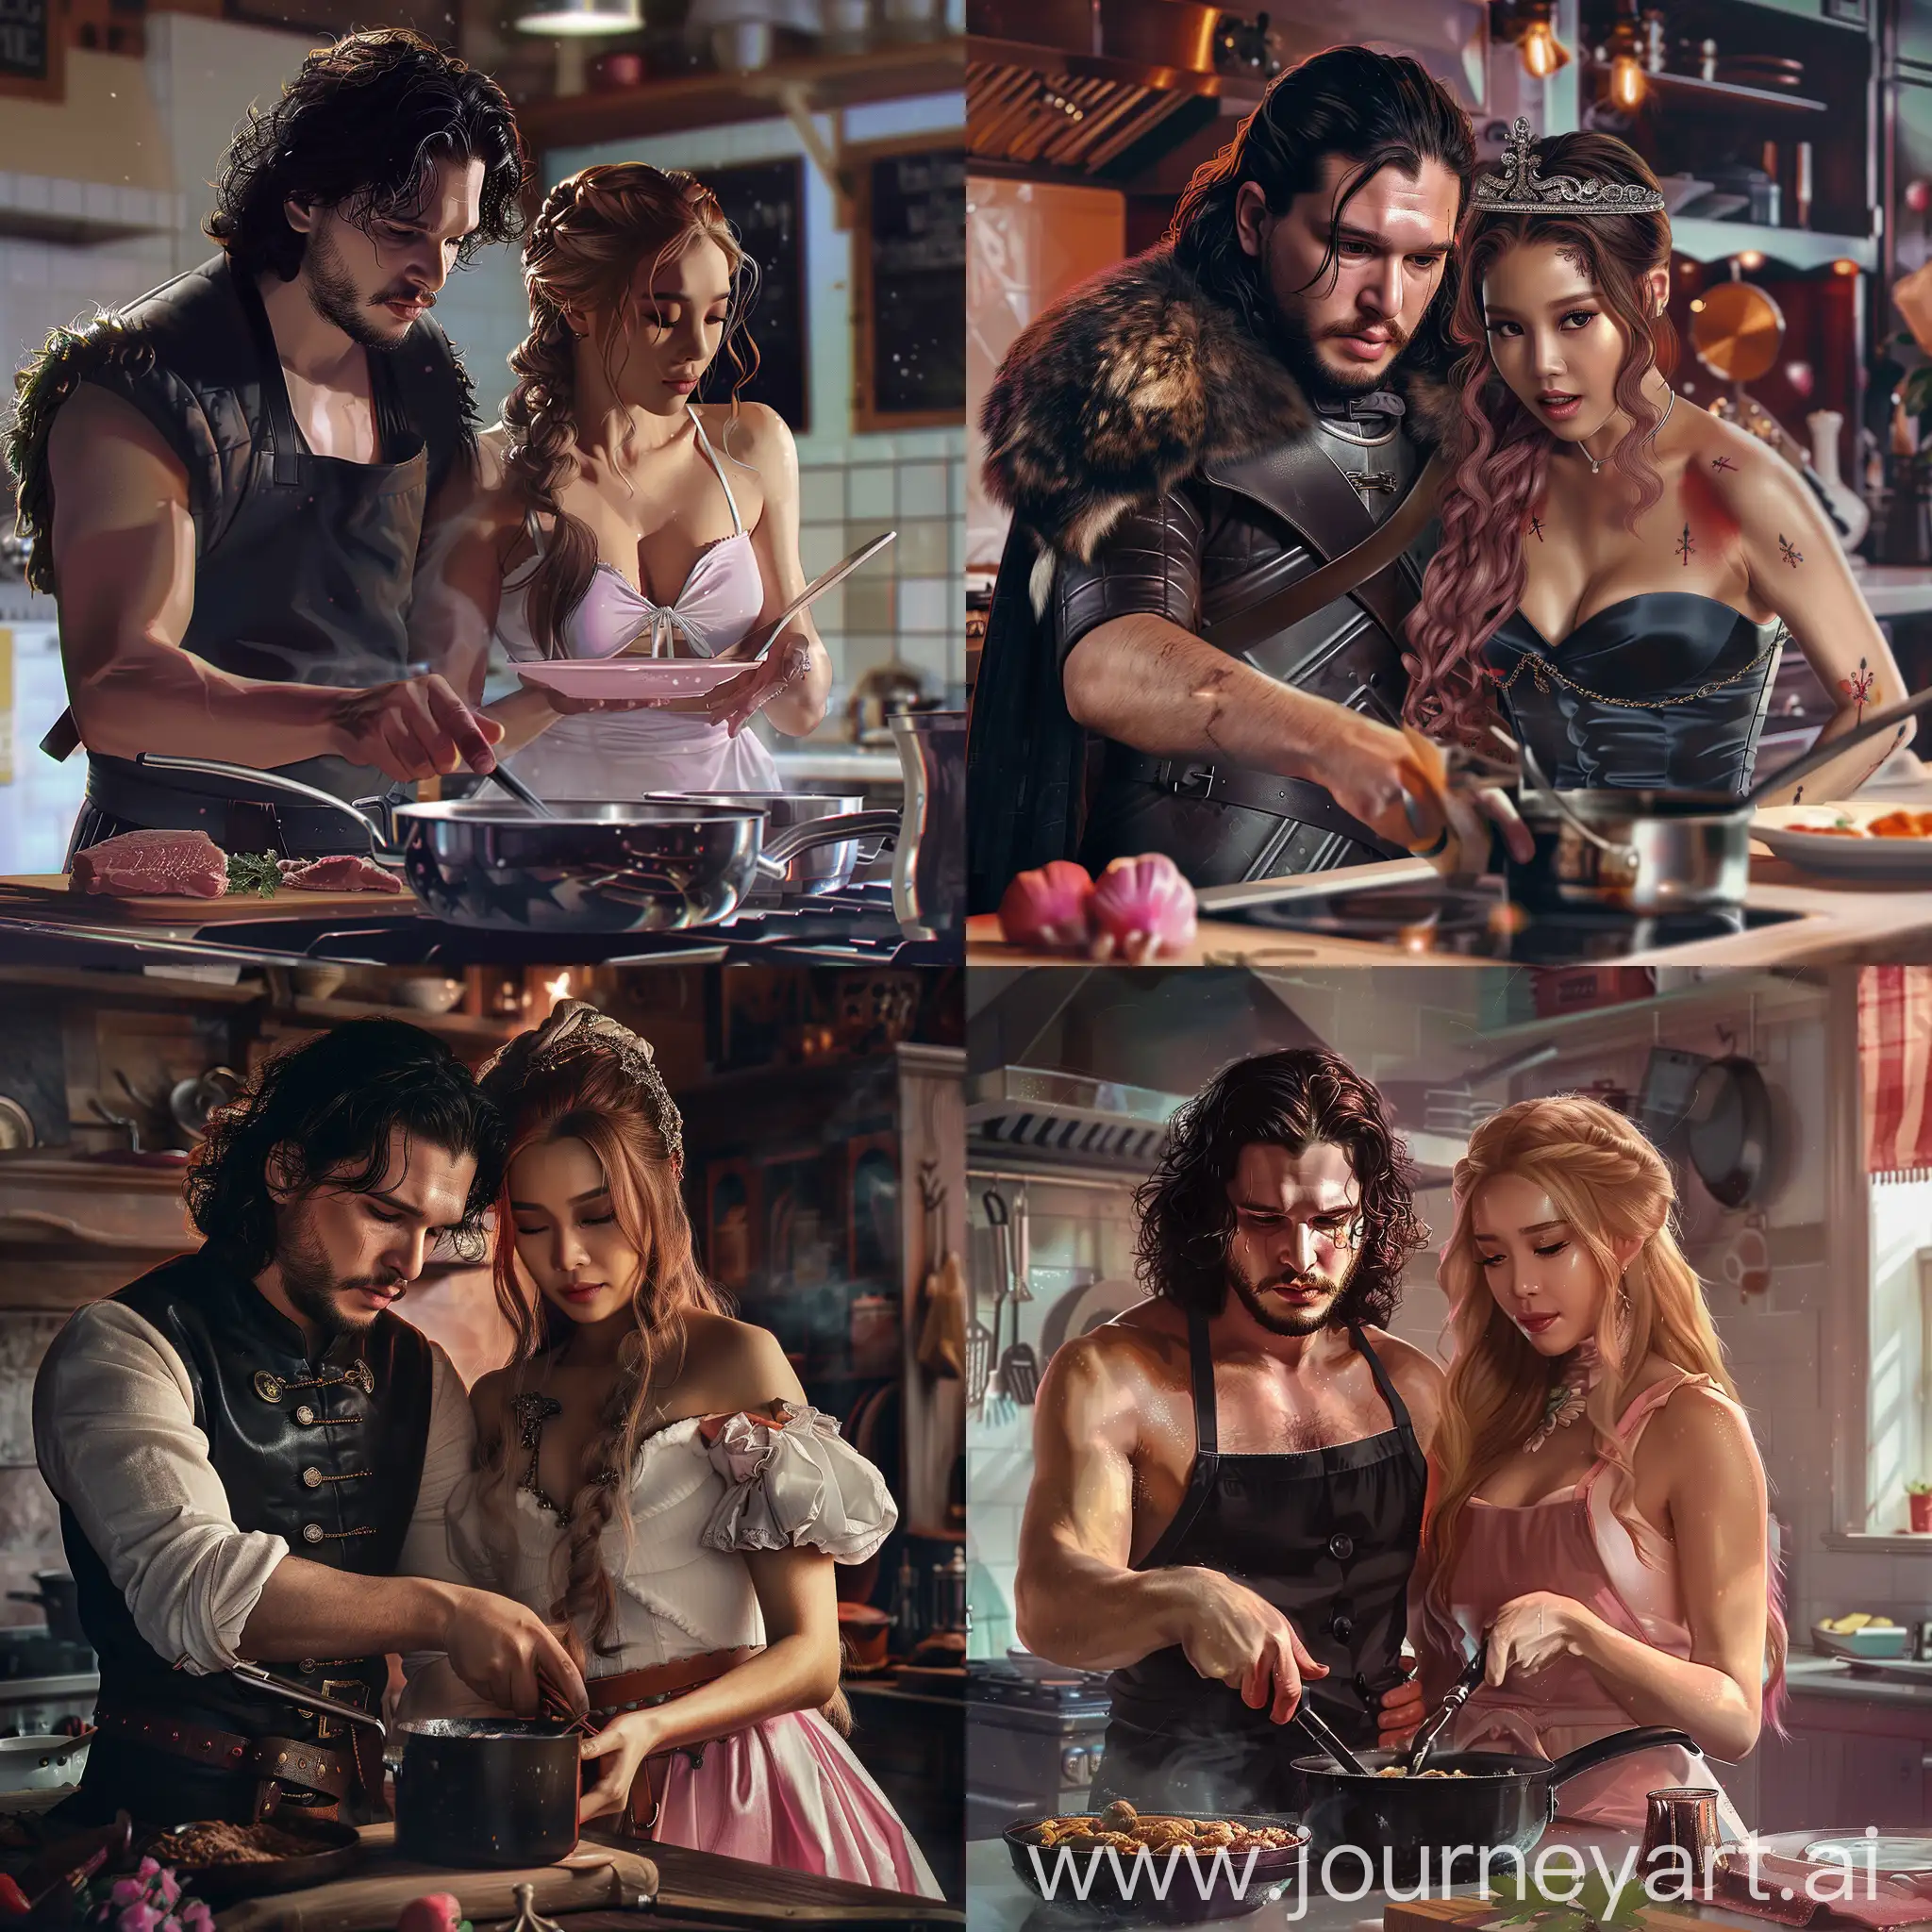 Jon Snow and Jennie from Blackpink in the kitchen cooking together, photorealistic